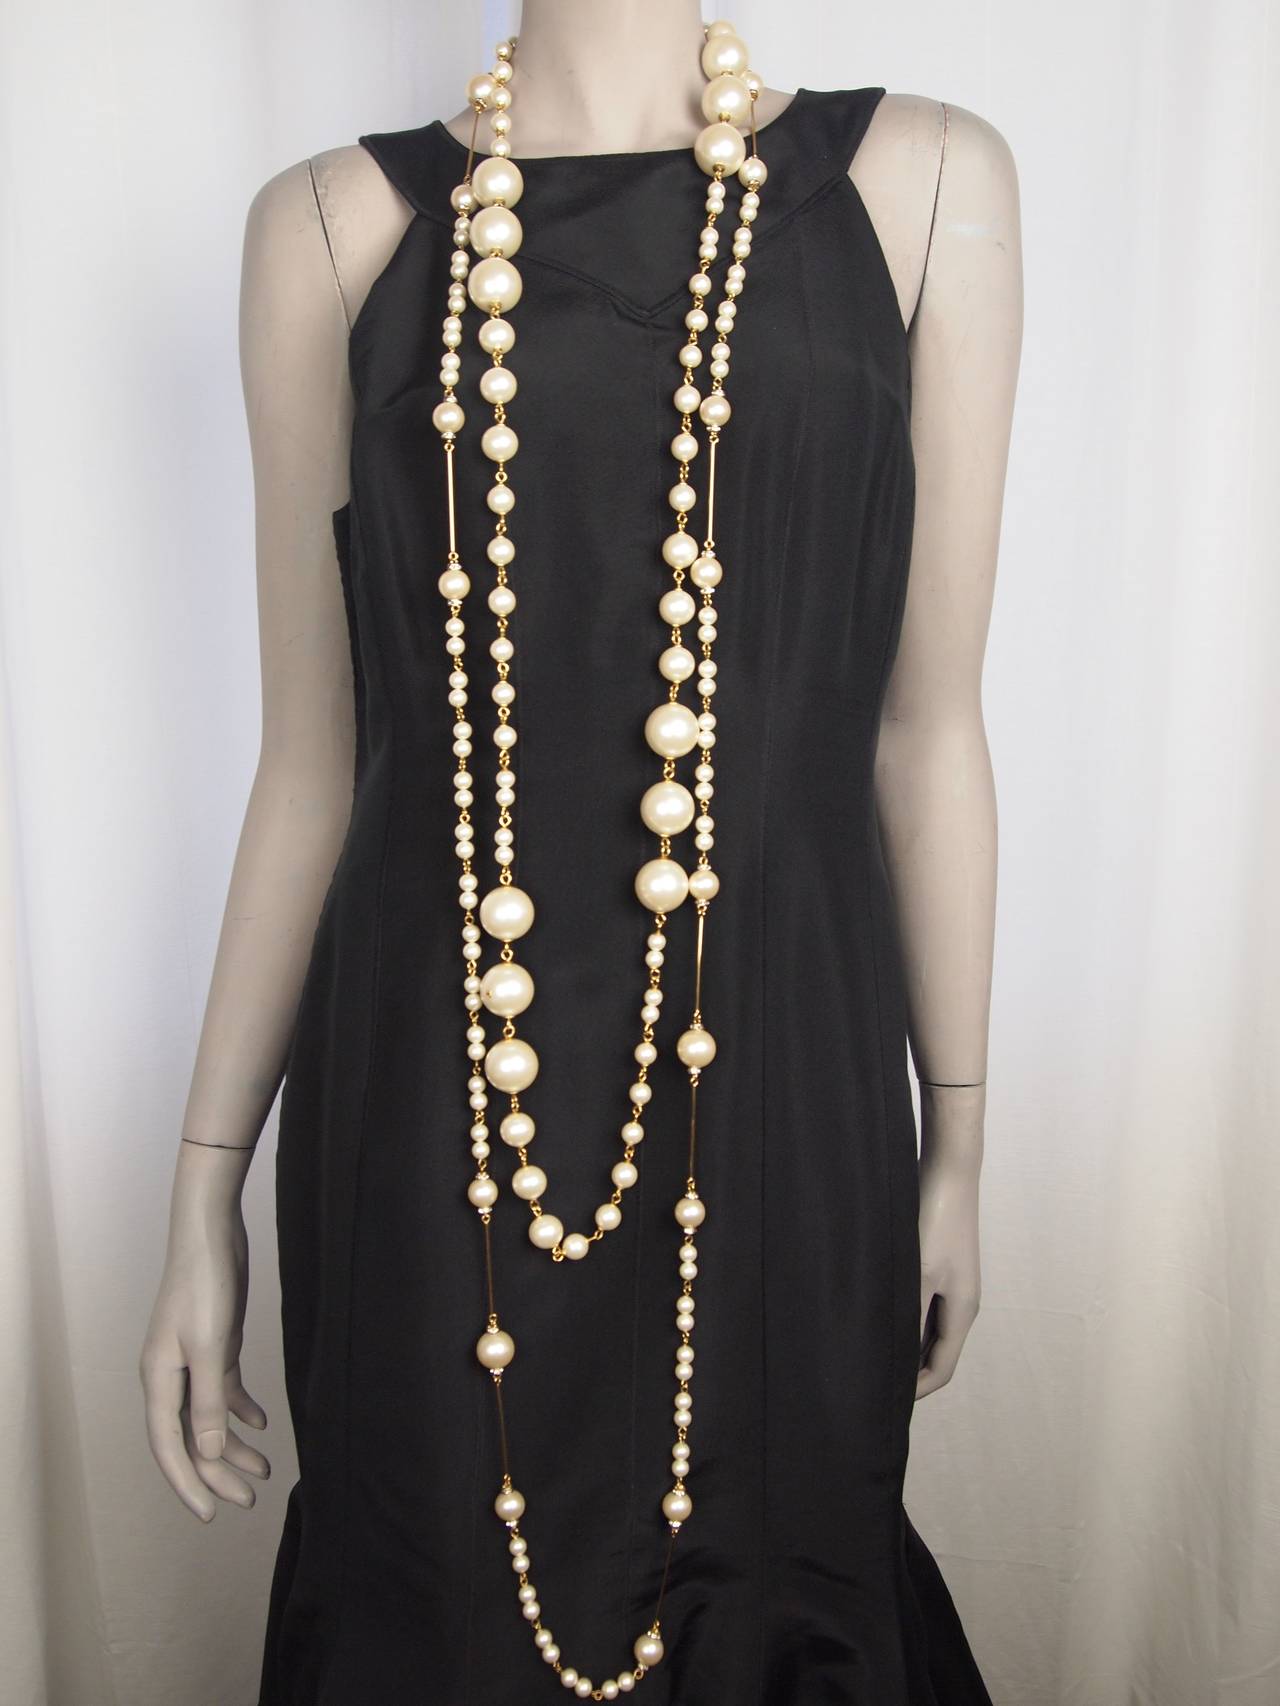 Pair of Chanel long pearl necklace with Chanel box.
Pearl necklace 74 inch and 56 inch